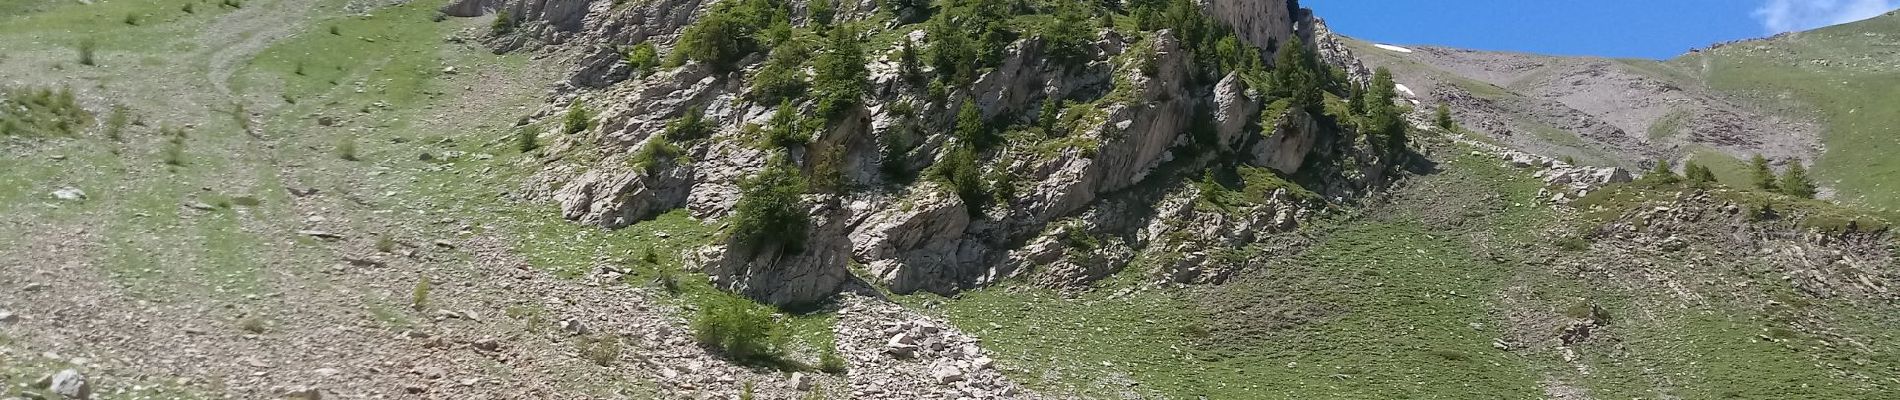 Trail Walking Embrun - Mont Guillaume - Photo